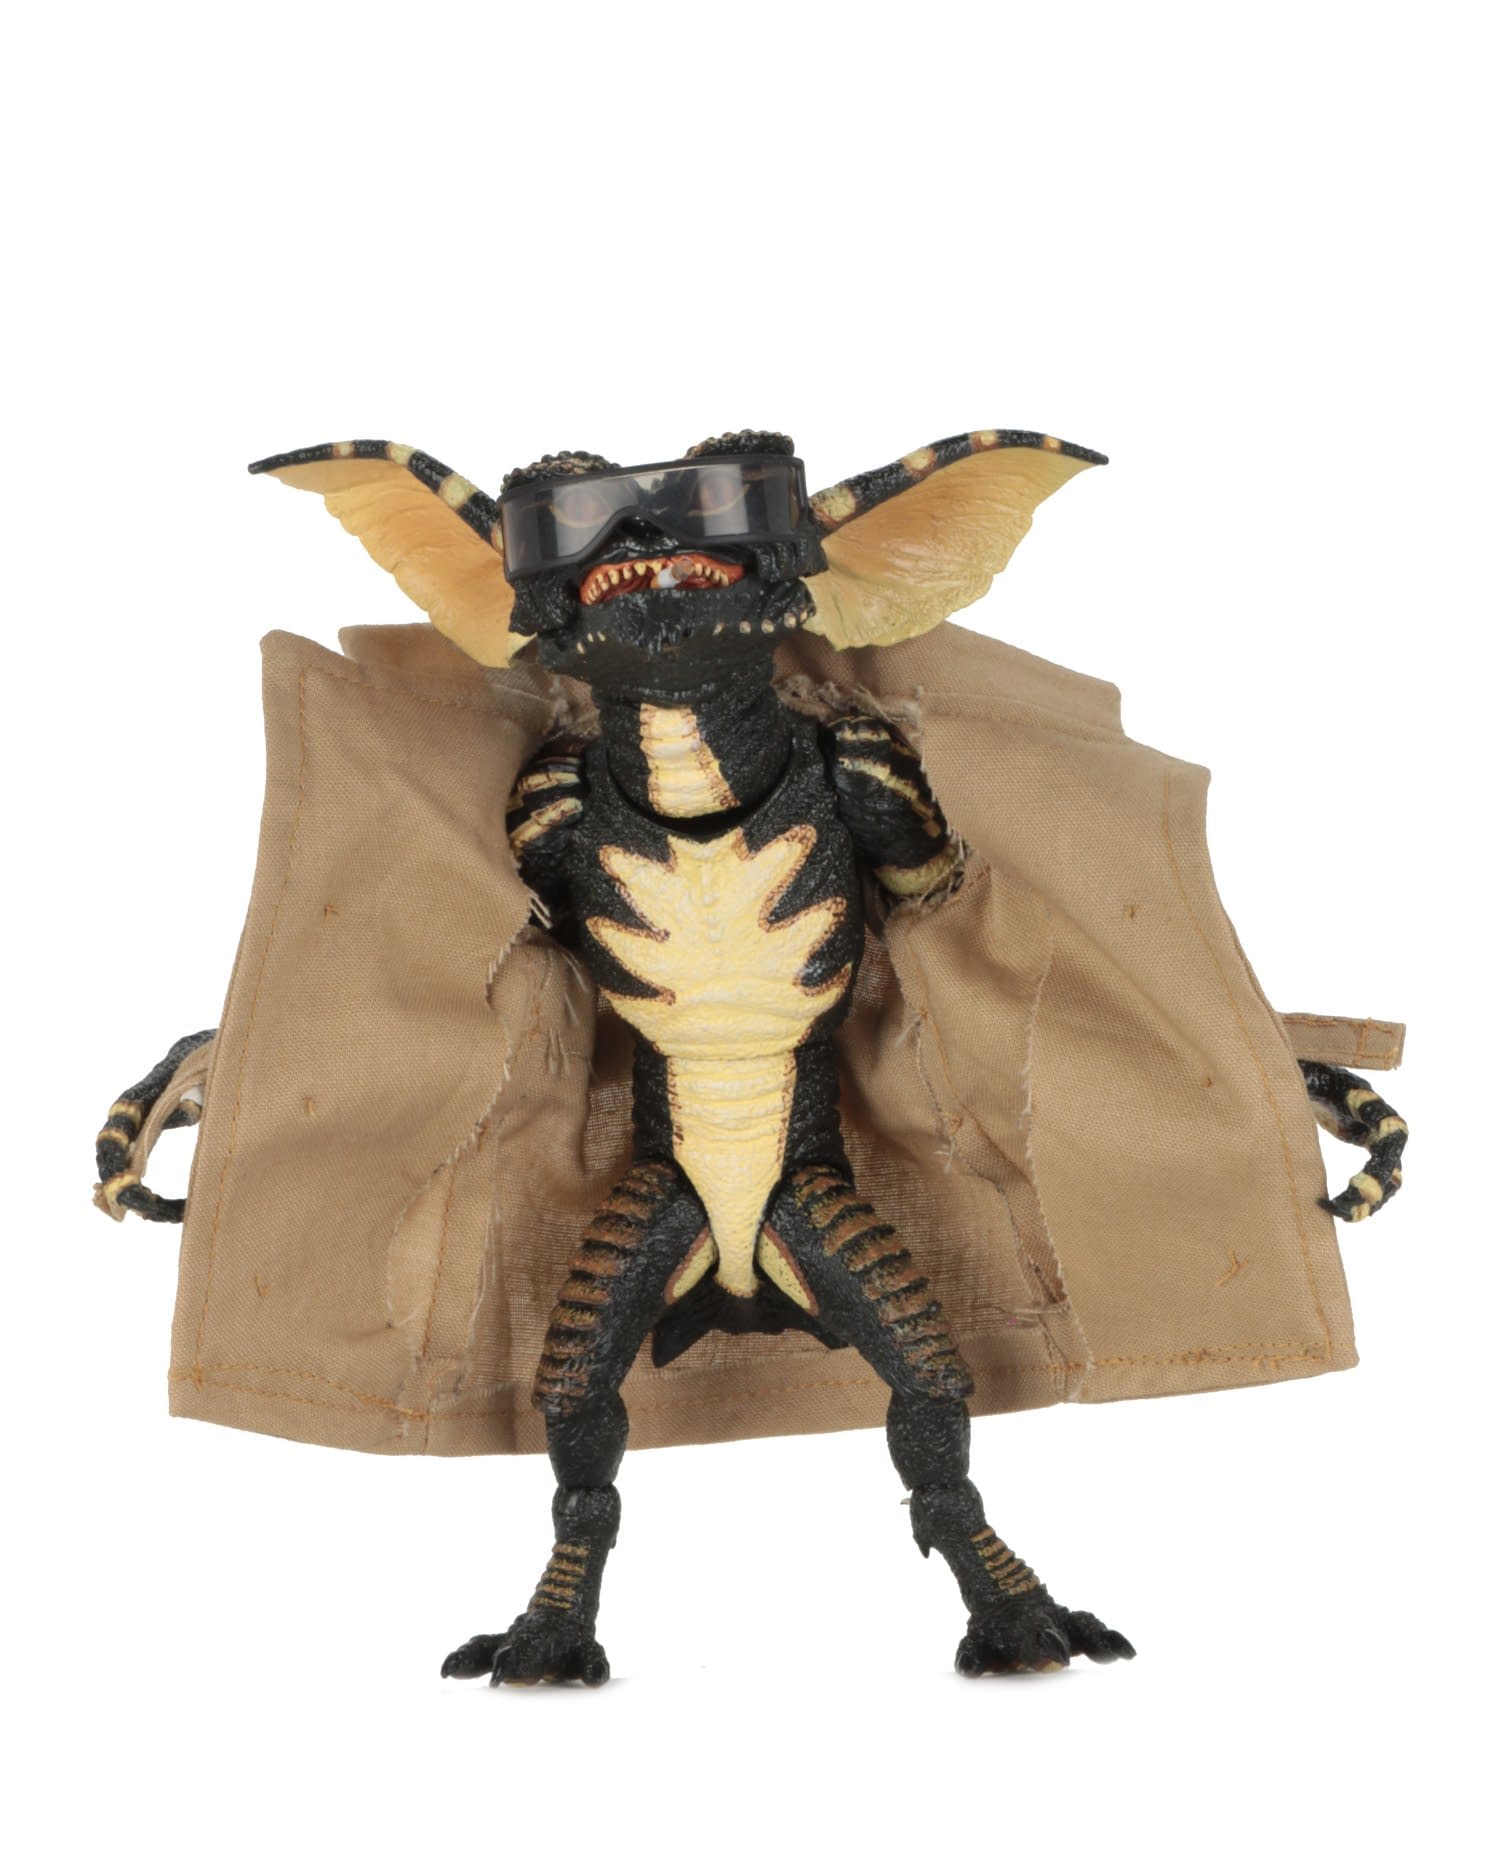 NECA Releases a Flasher with New 